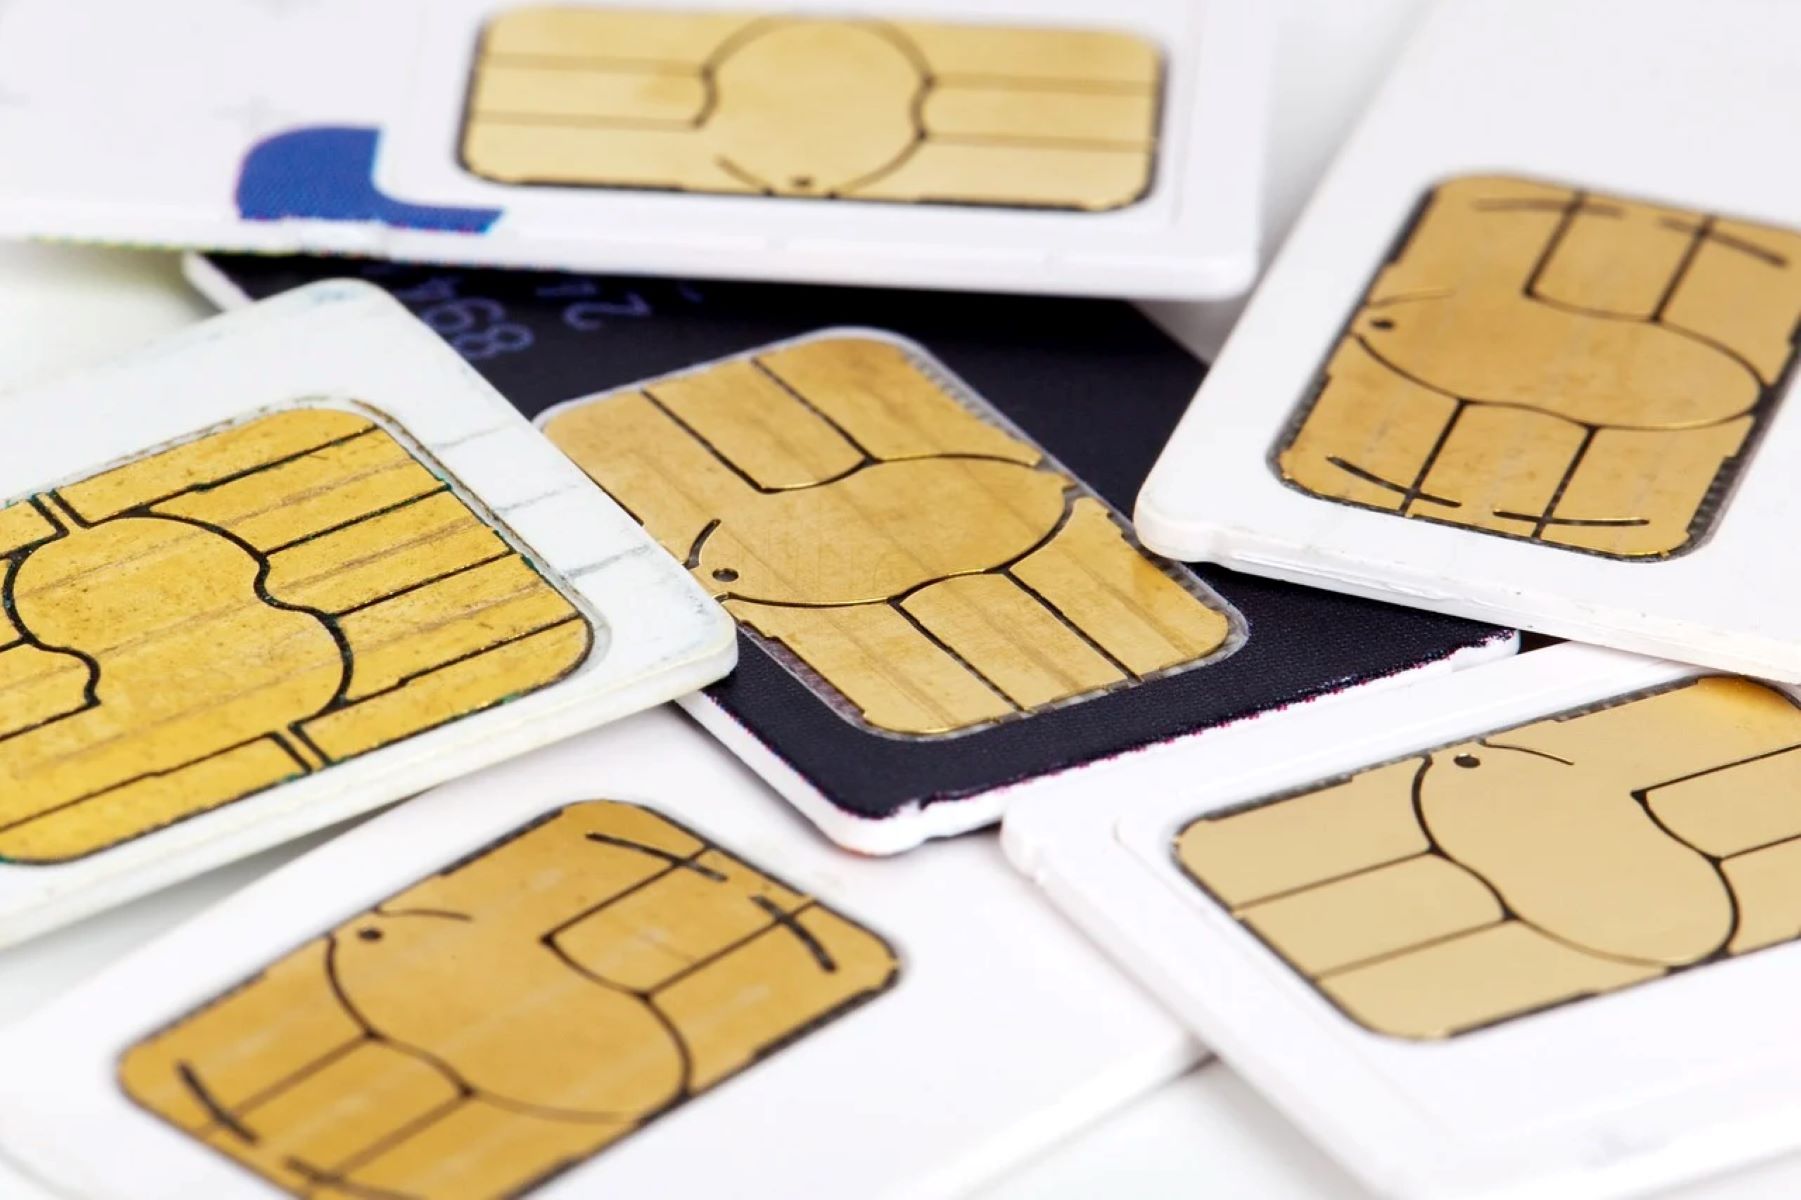 Finding The SIM Card Number On A Device